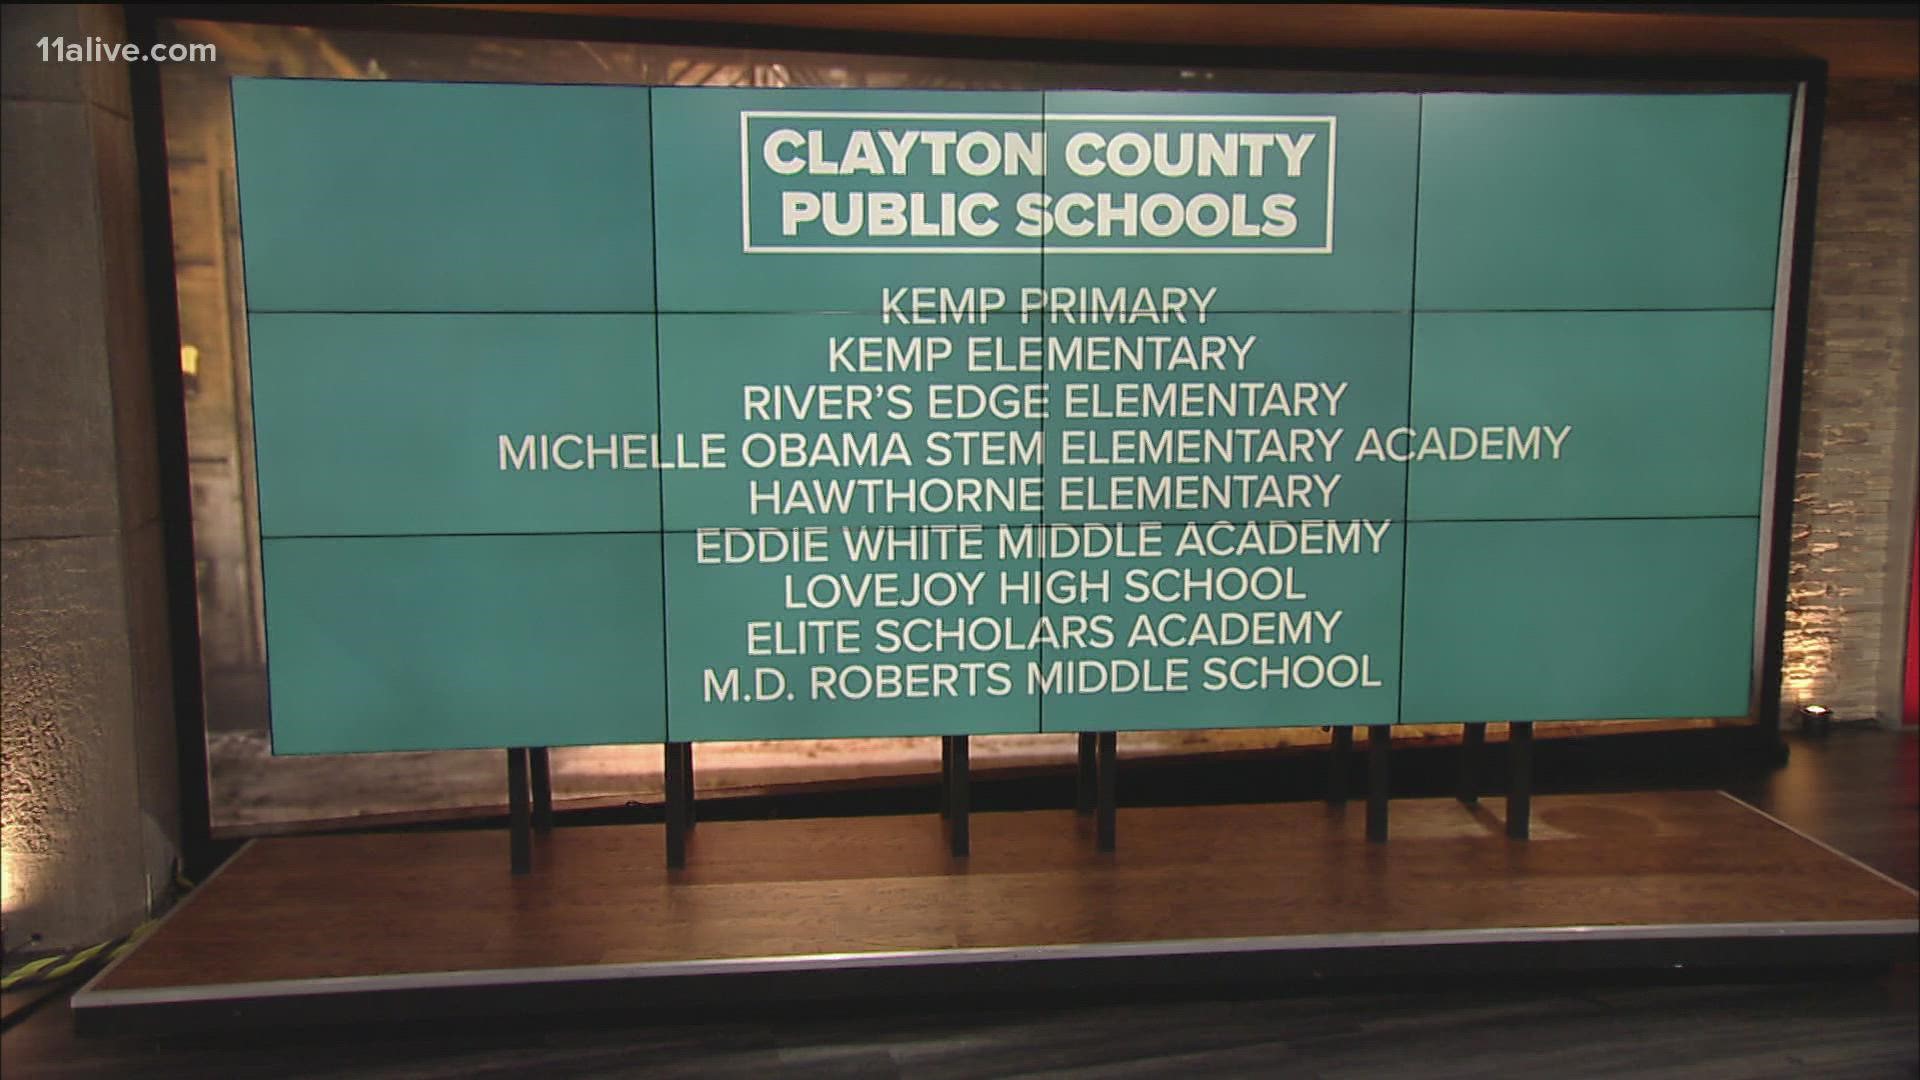 These are the schools that are impacted.